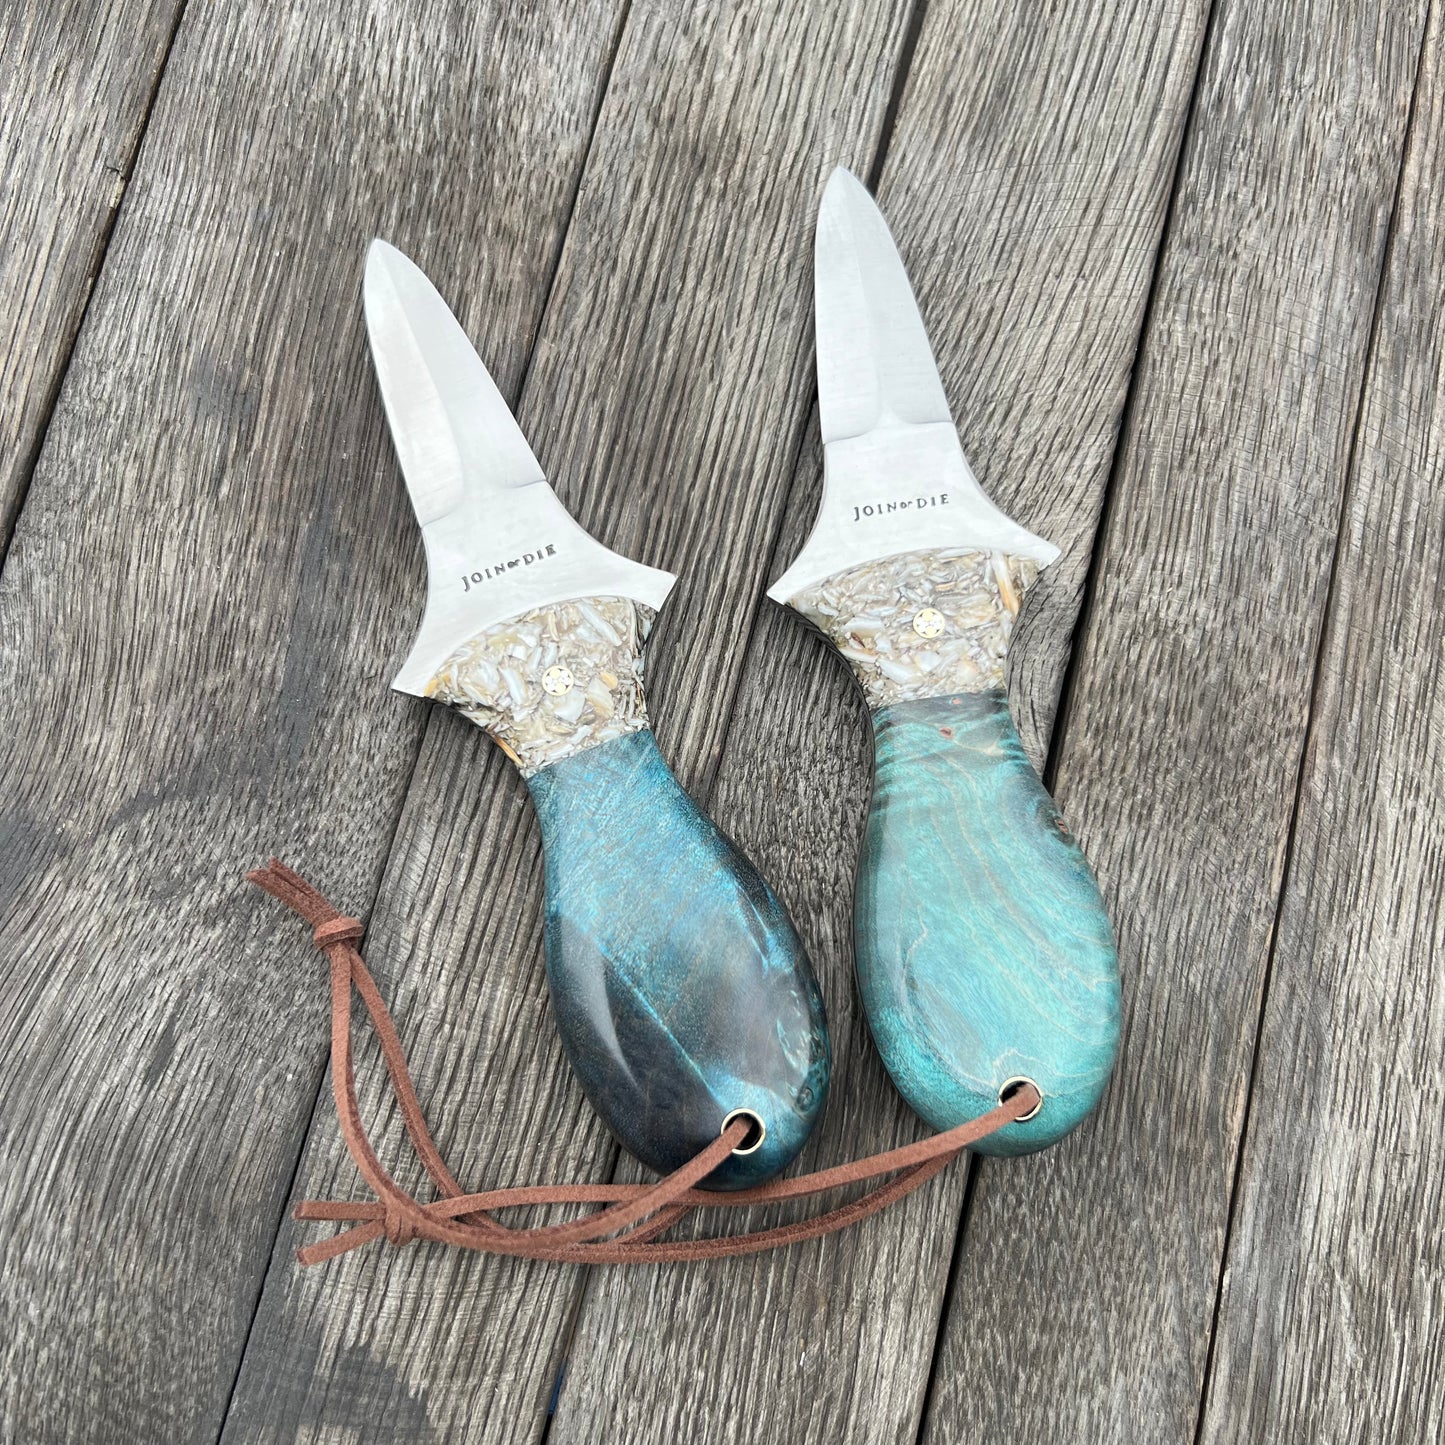 Edisto Oyster Knife with Oyster Shell Handle